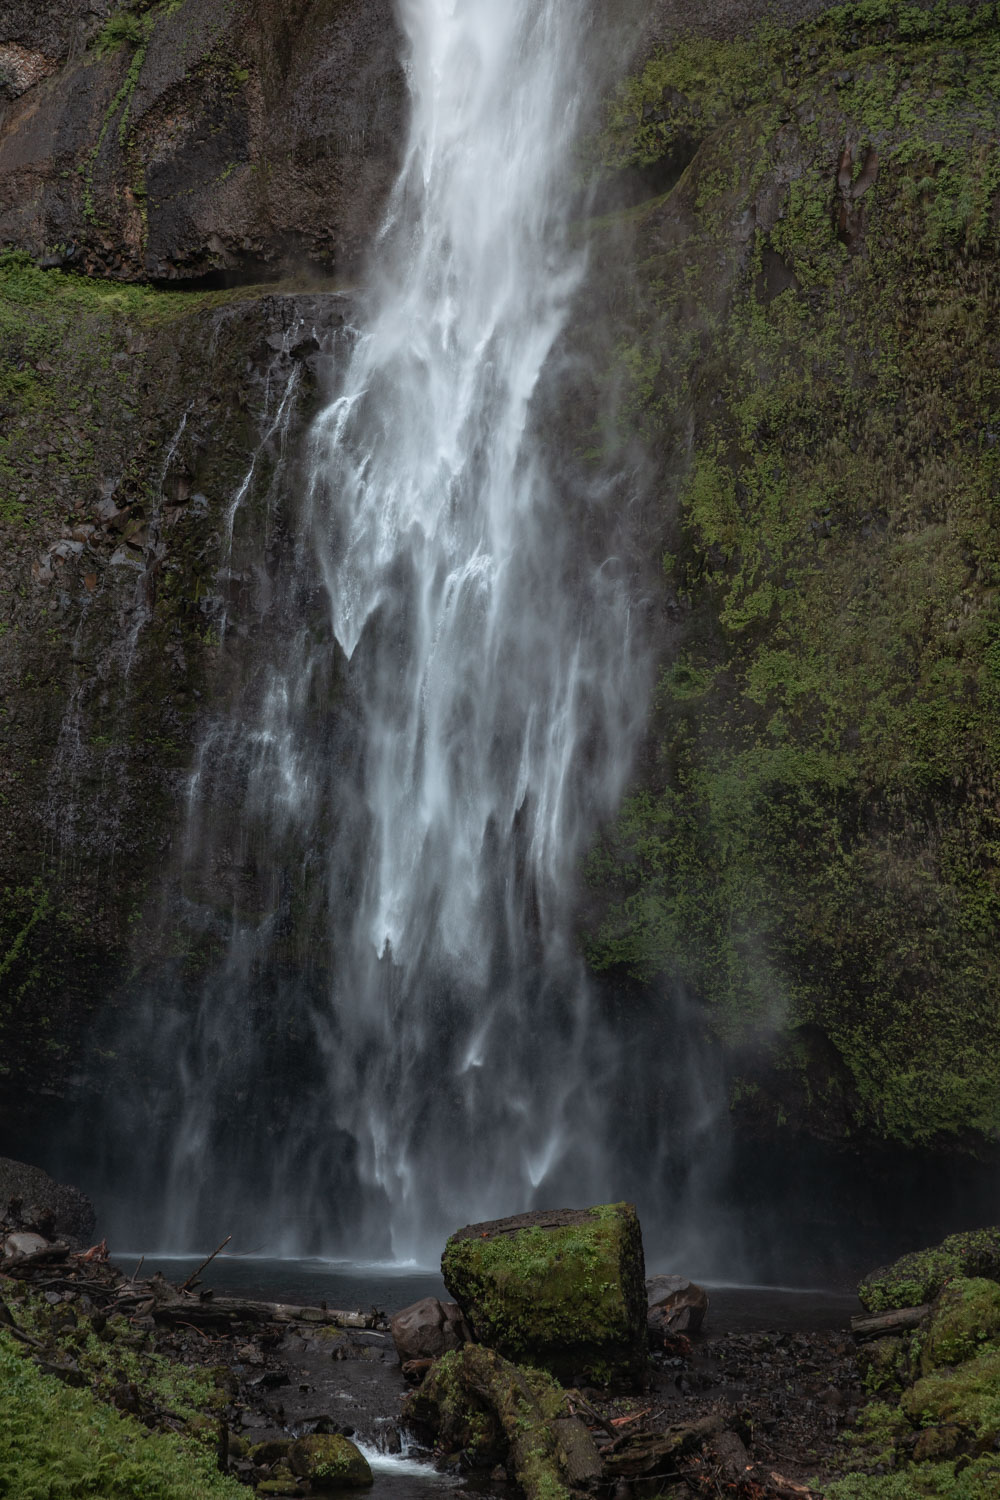 multnomah falls is one of the best portland oregon waterfalls that can not be missed